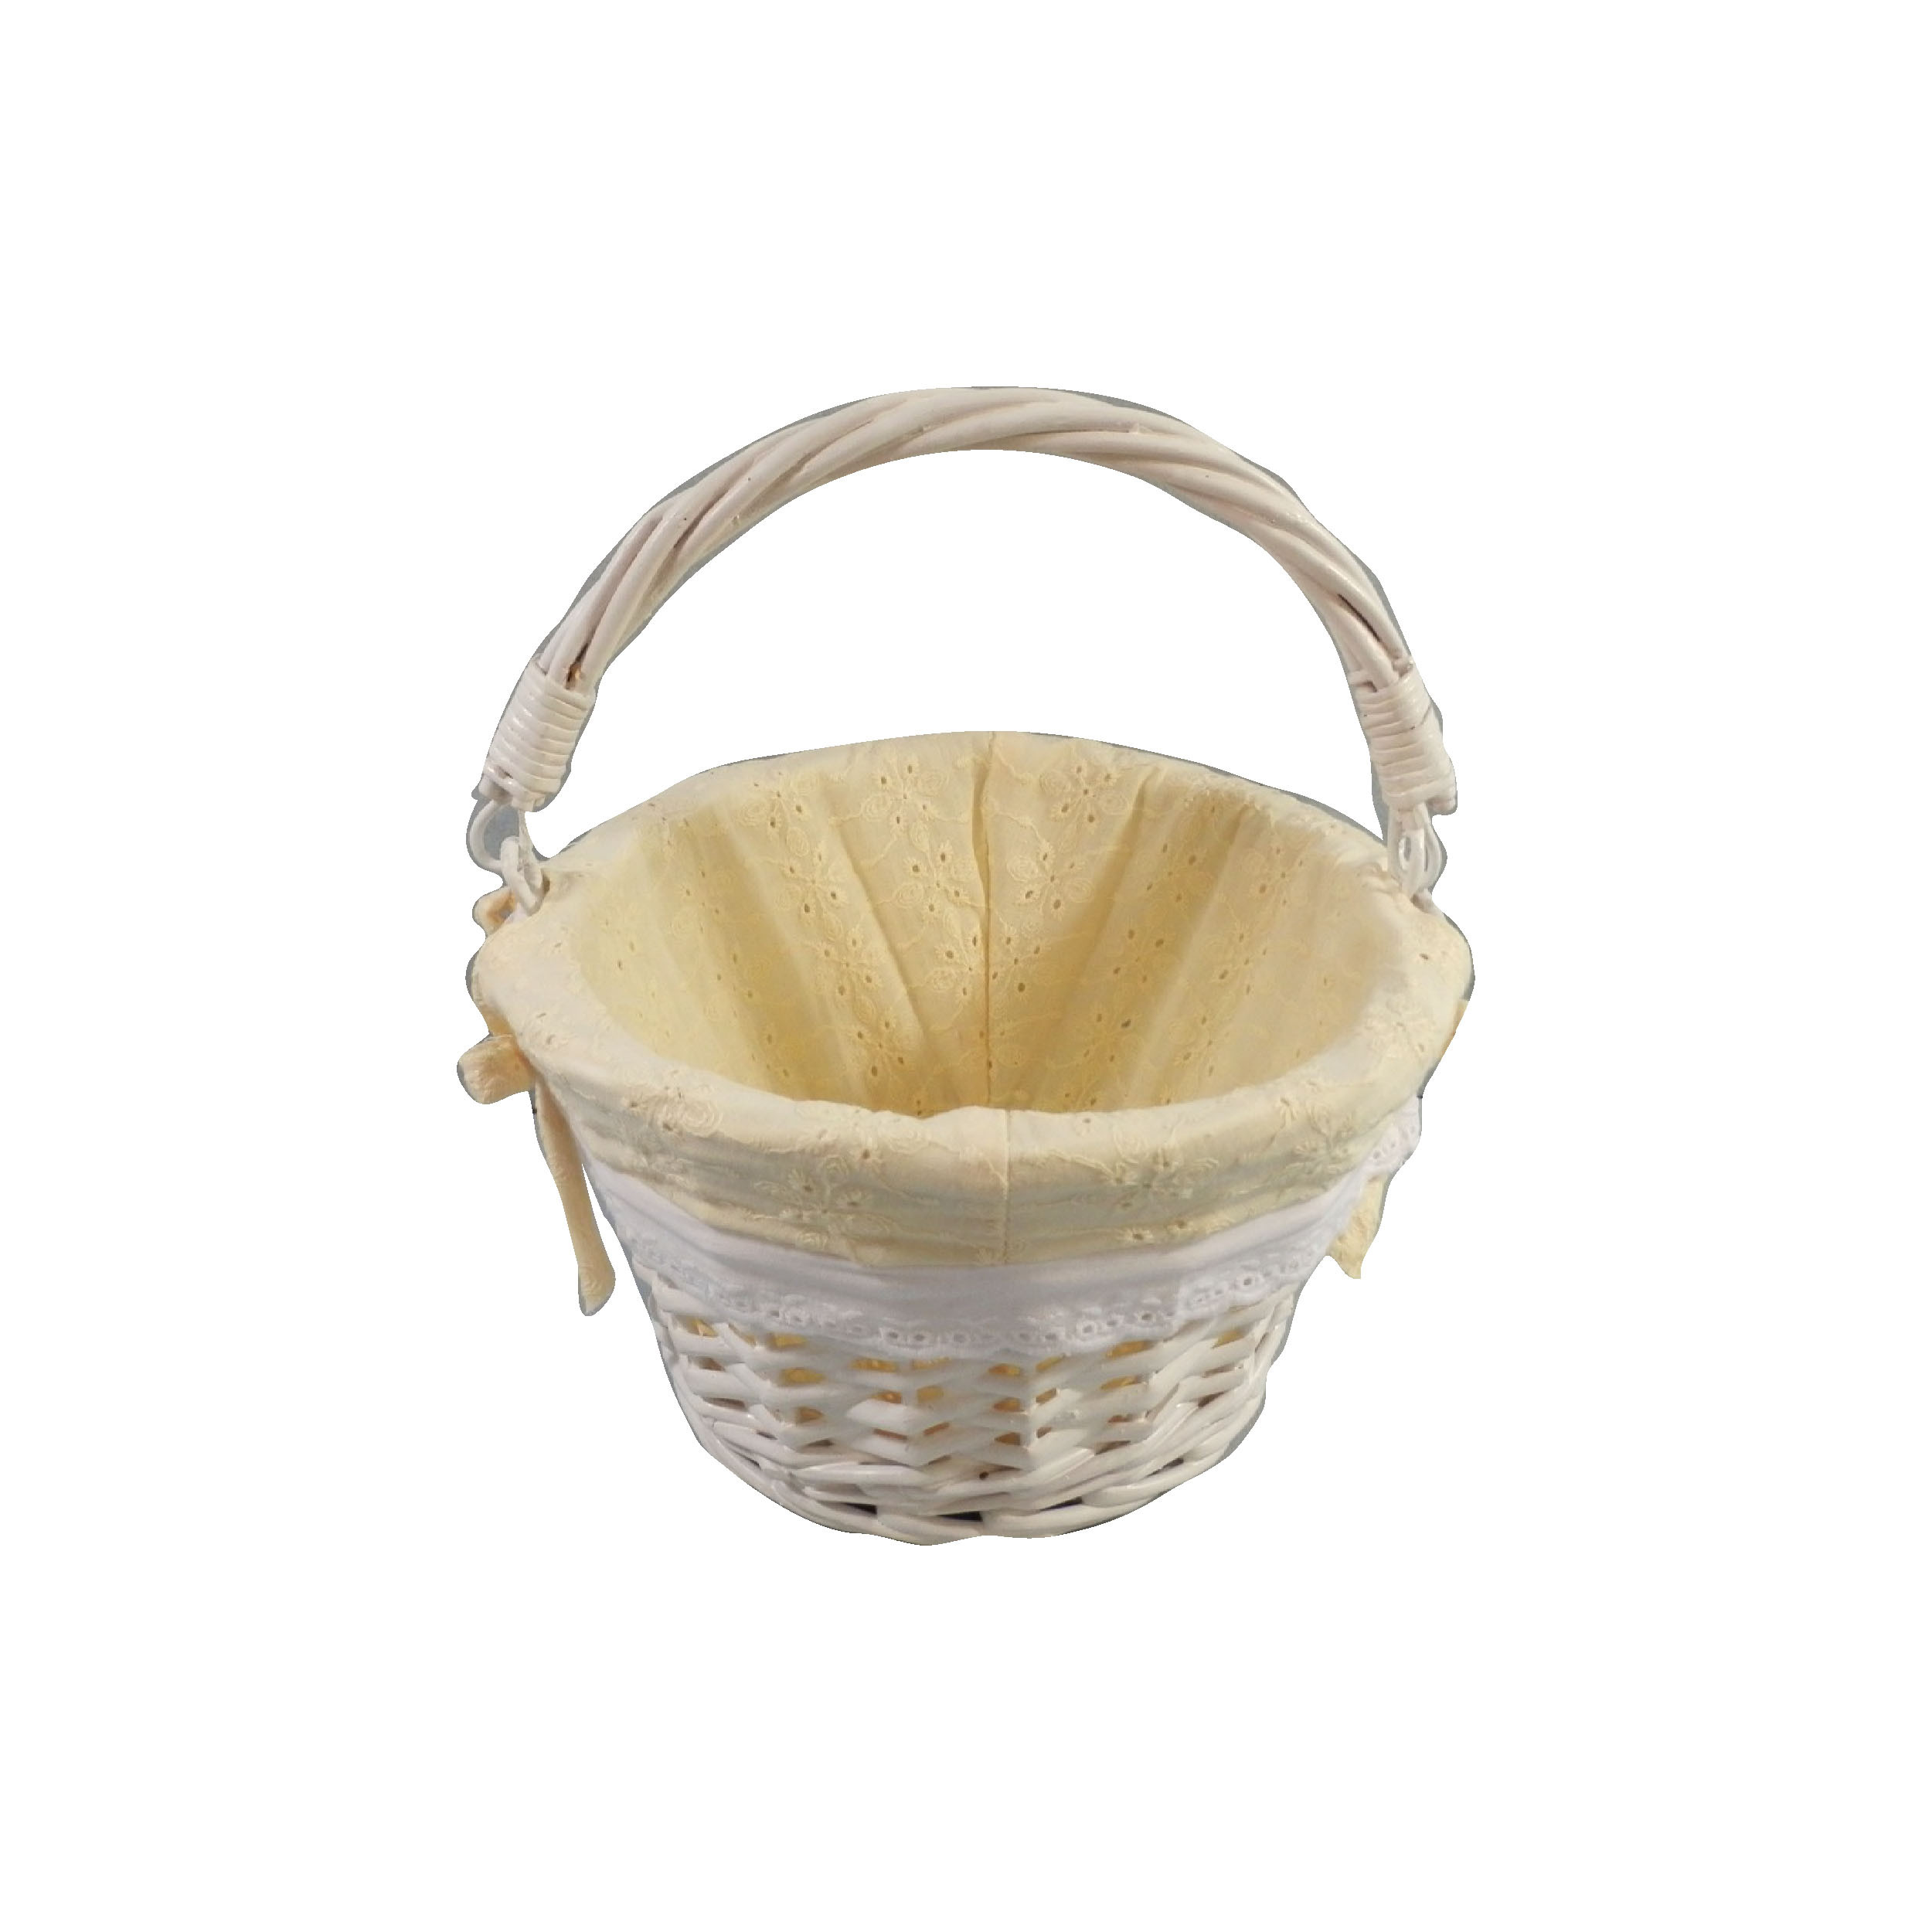 Small Easter Gifts
 Easter Jubilee Small Round White Wicker Easter Basket Yellow